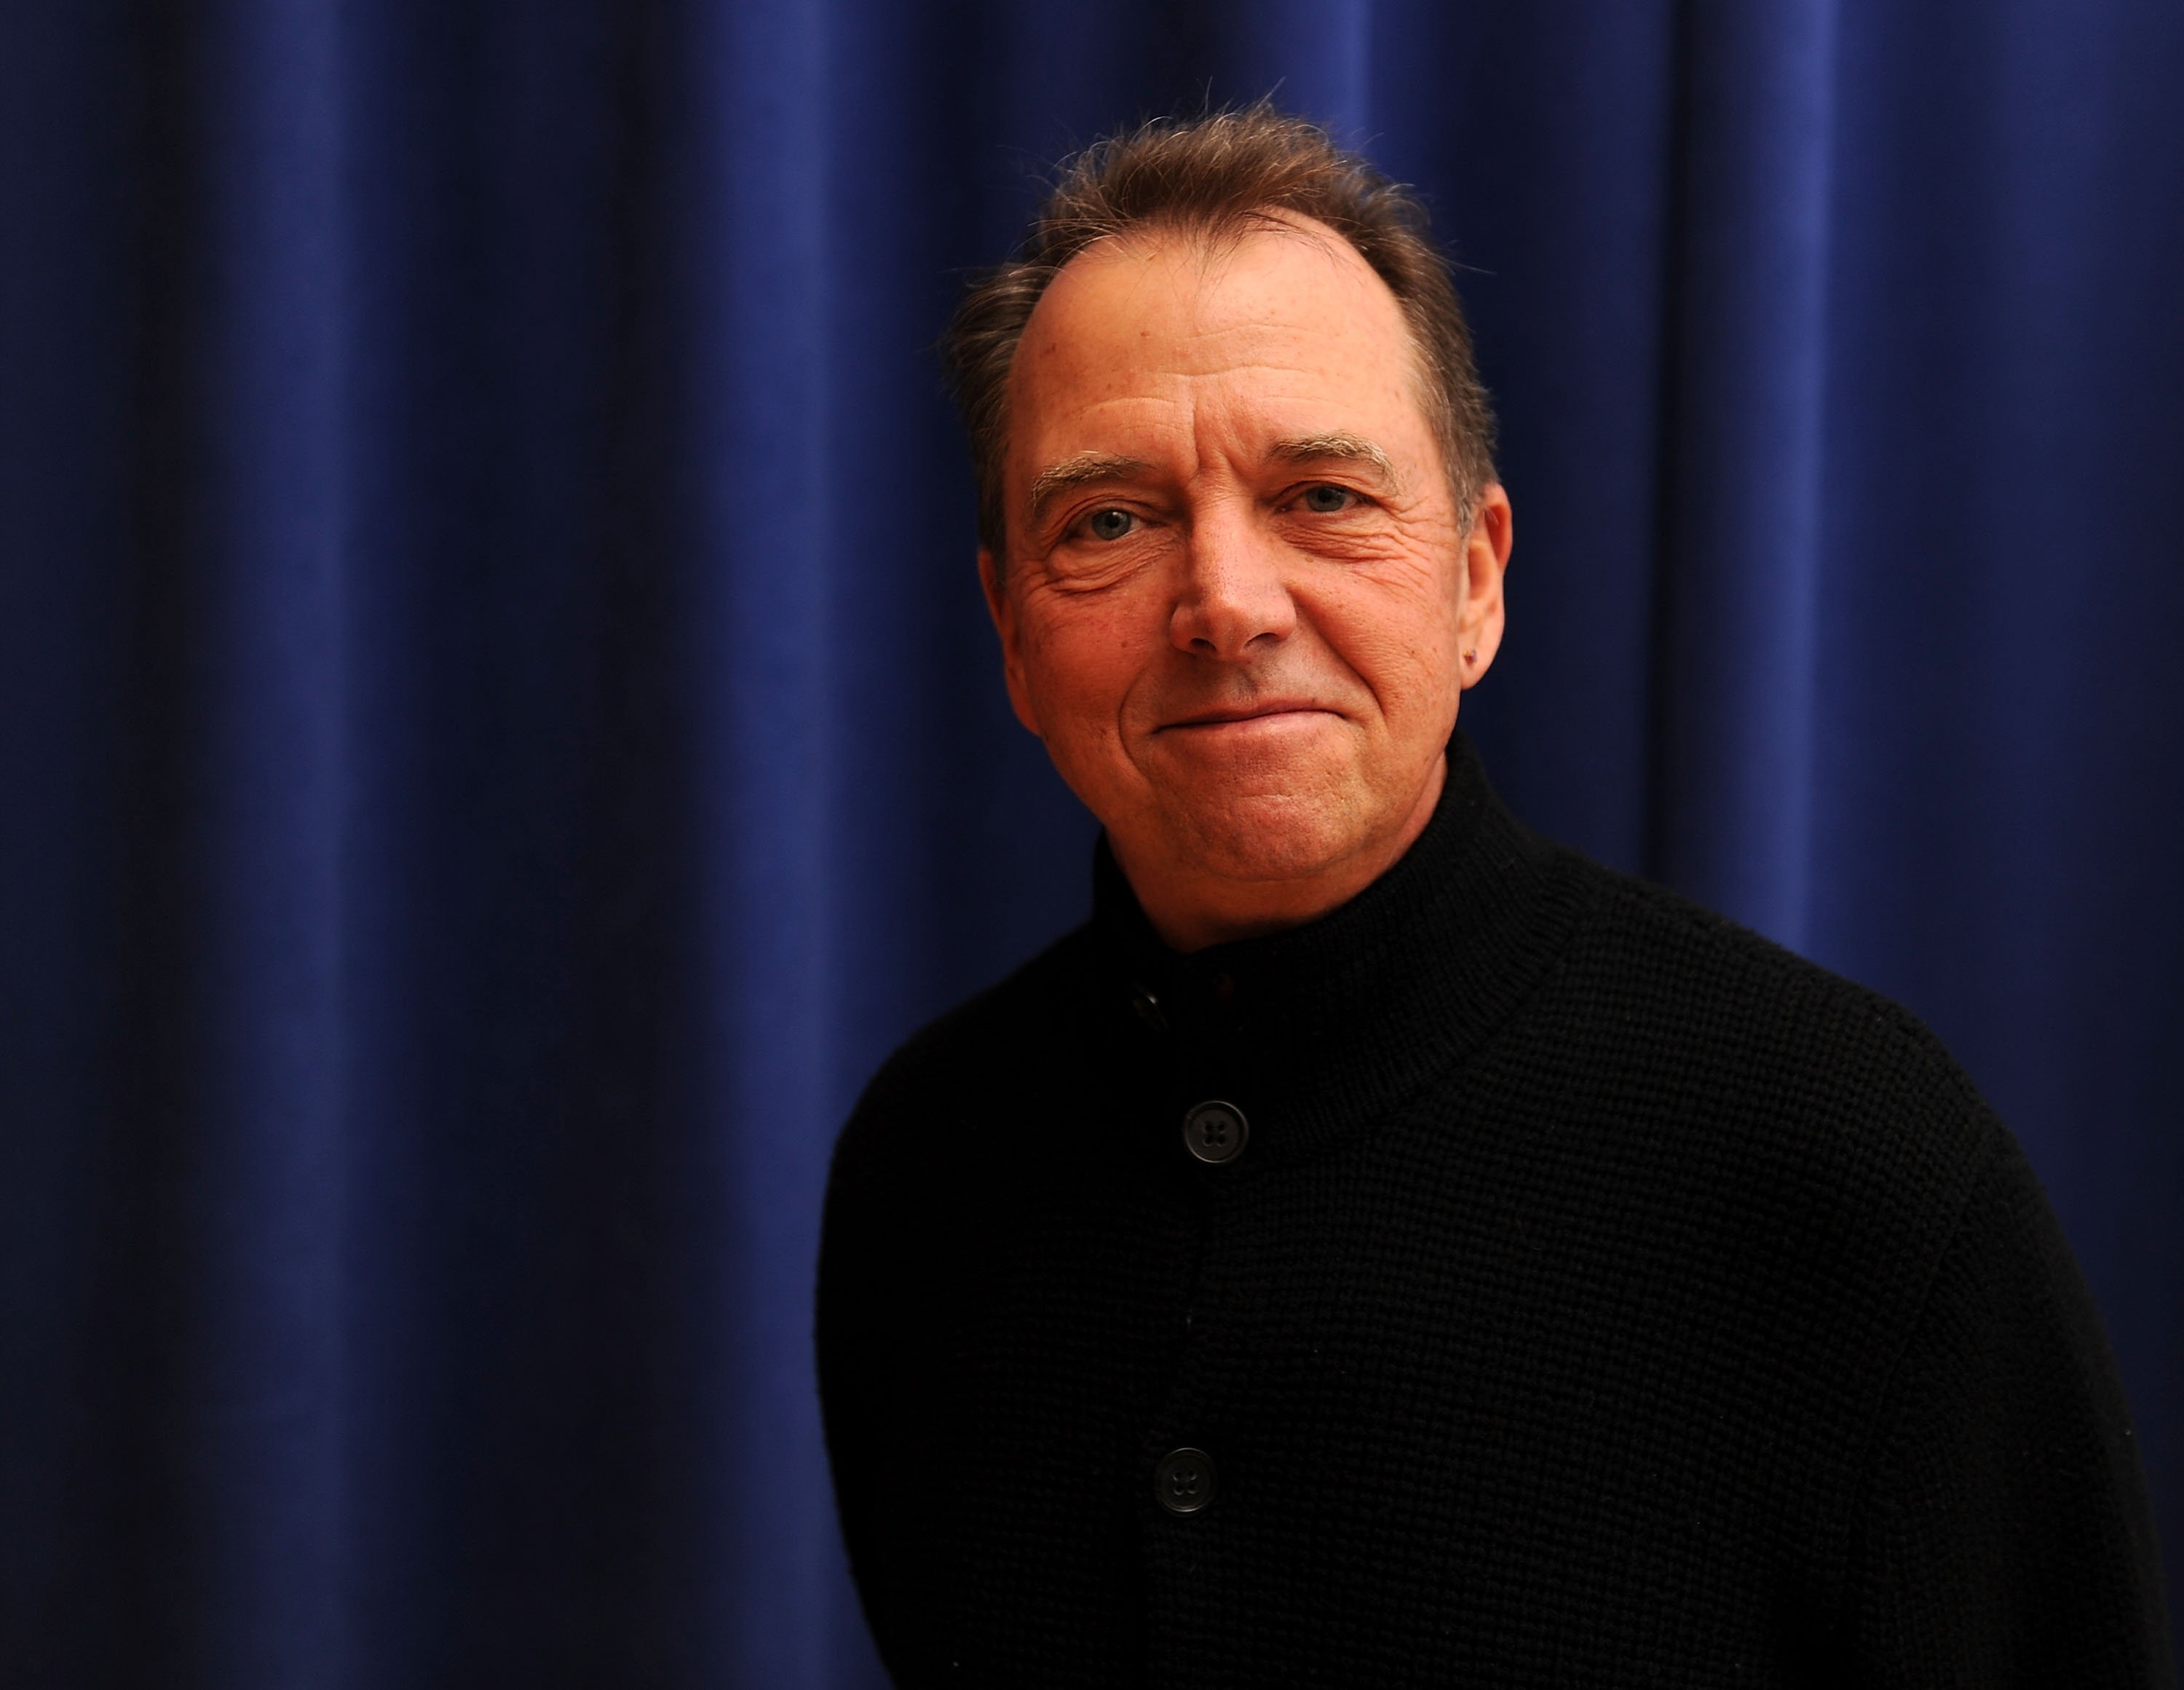 Gregory Itzin poses for a picture while wearing a black turtleneck.